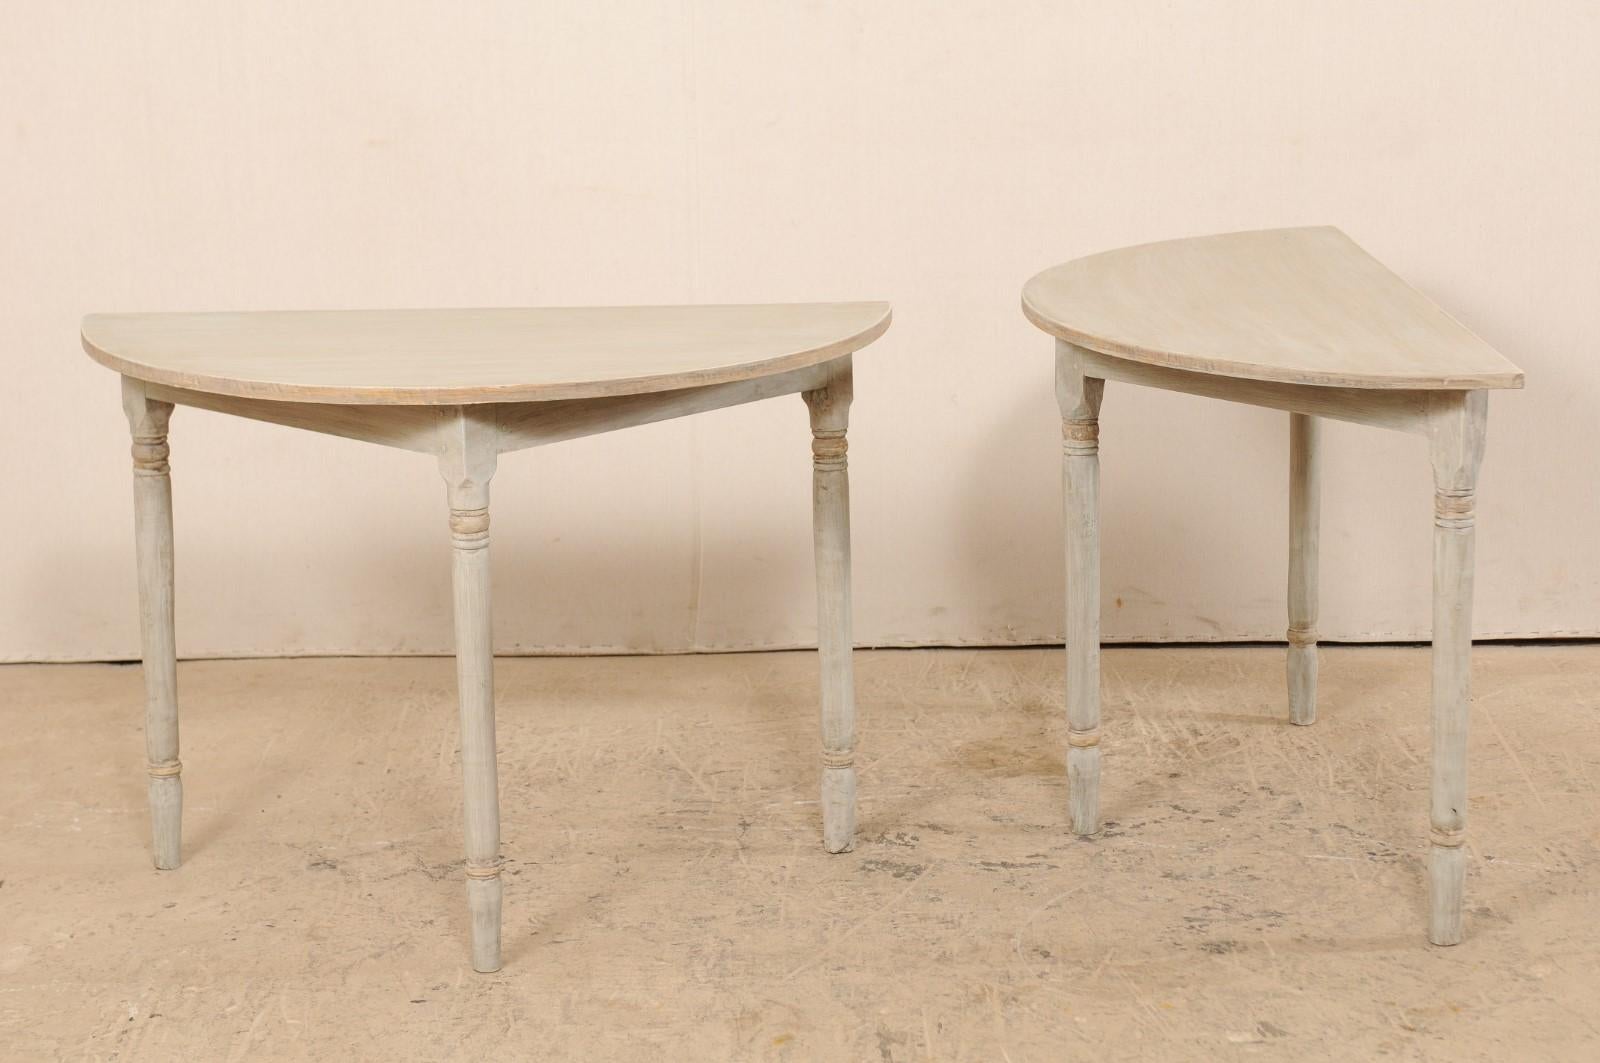 A pair of 19th century Swedish painted wood demilune tables. This pair of antique demilune tables from Sweden each features half moon tops over triangular-shaped aprons, and are raised on three rounded legs with turned carvings accentuating their